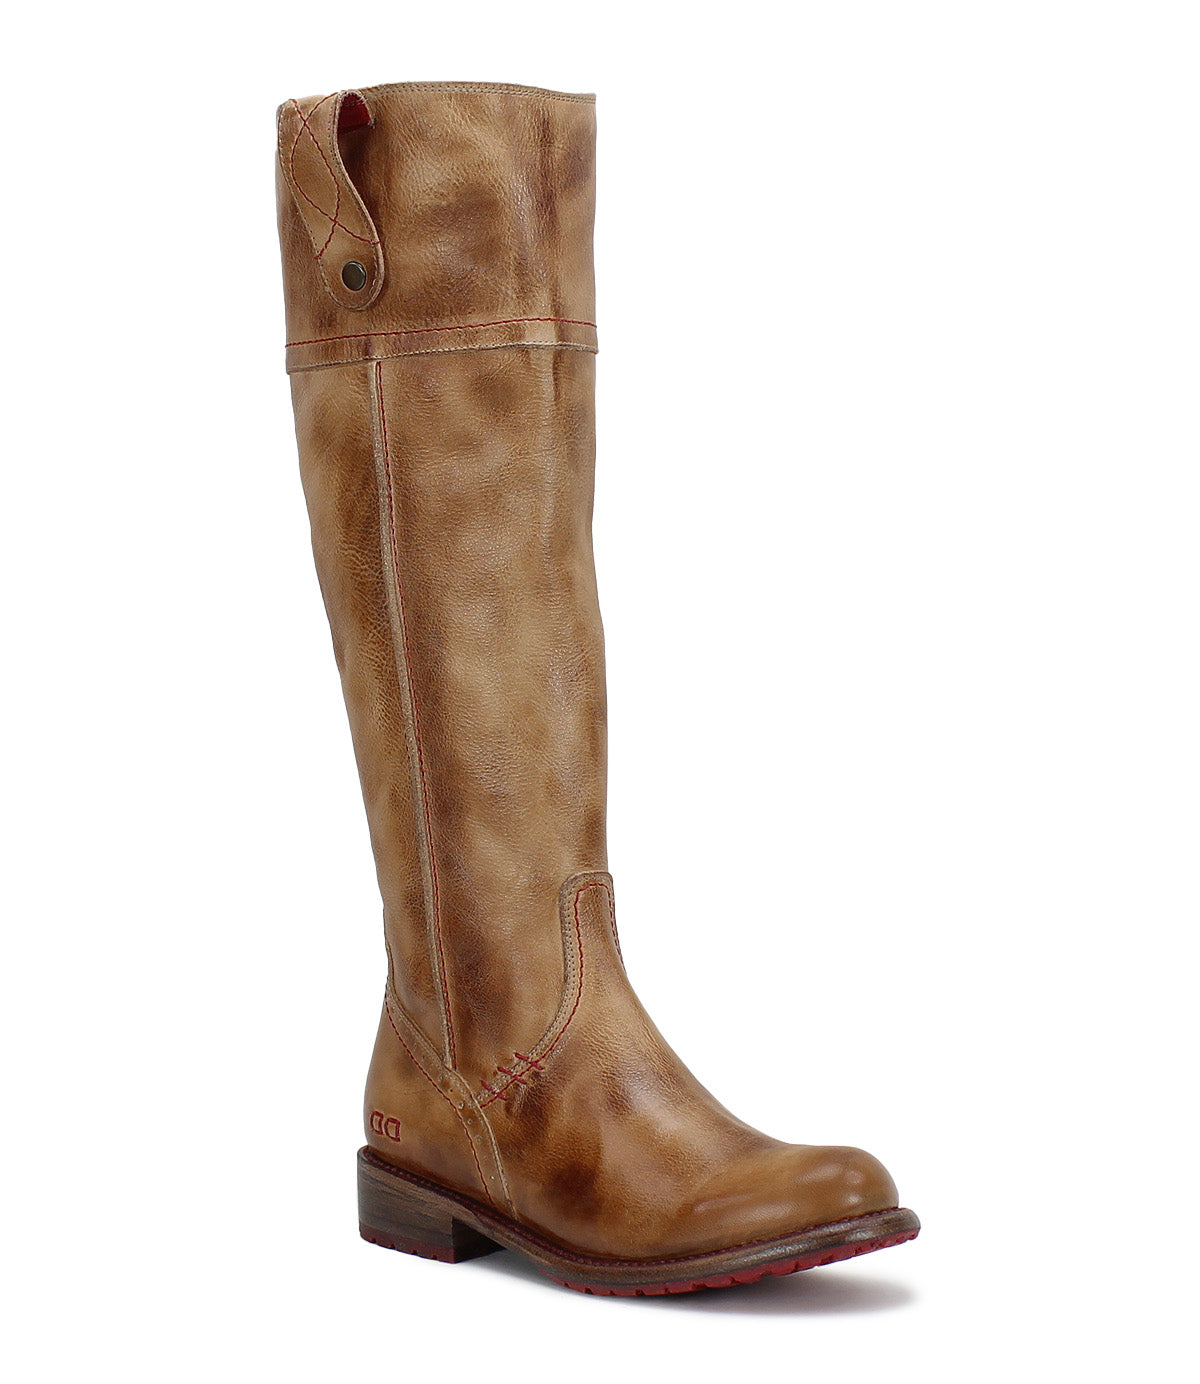 A Jacqueline women's riding boot in tan leather by Bed Stu.